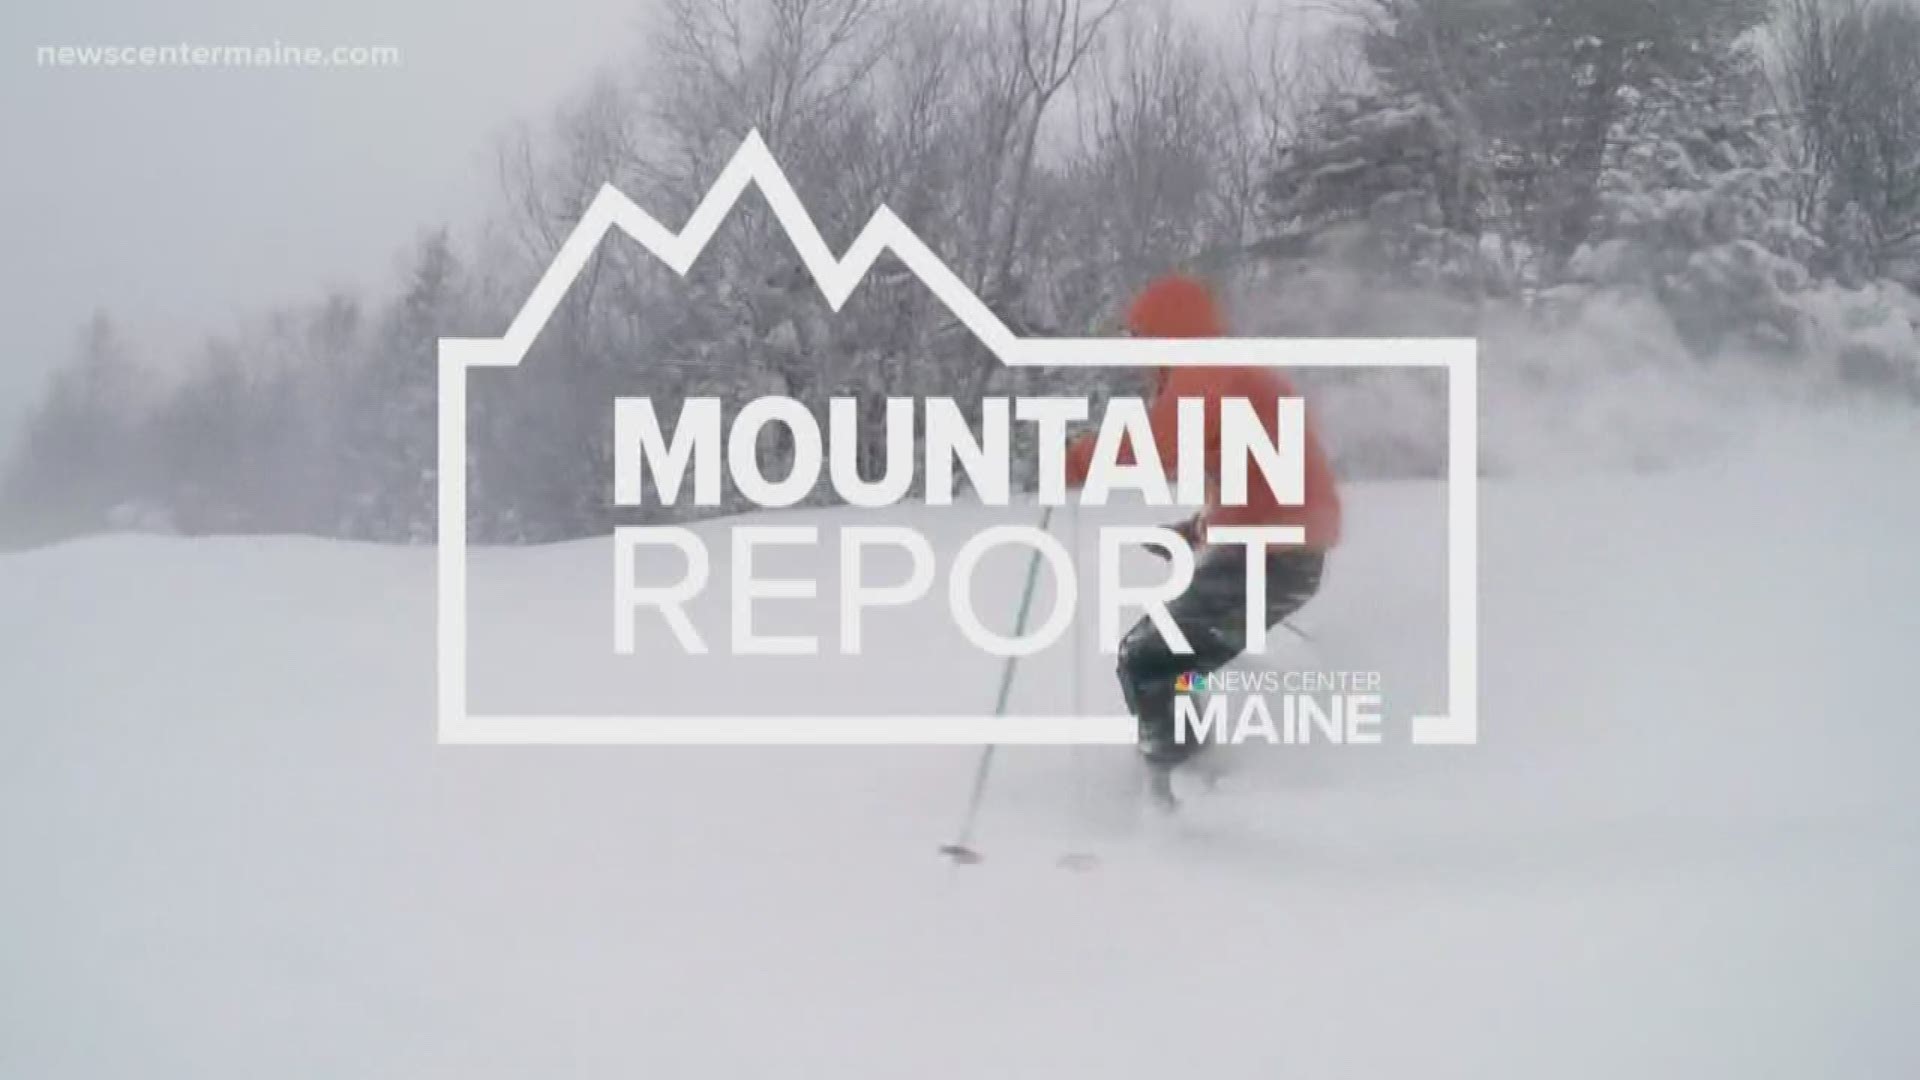 NEWS CENTER Maine's Weekend Mountain Report with Mallory Brooke for December 28th, 2019.